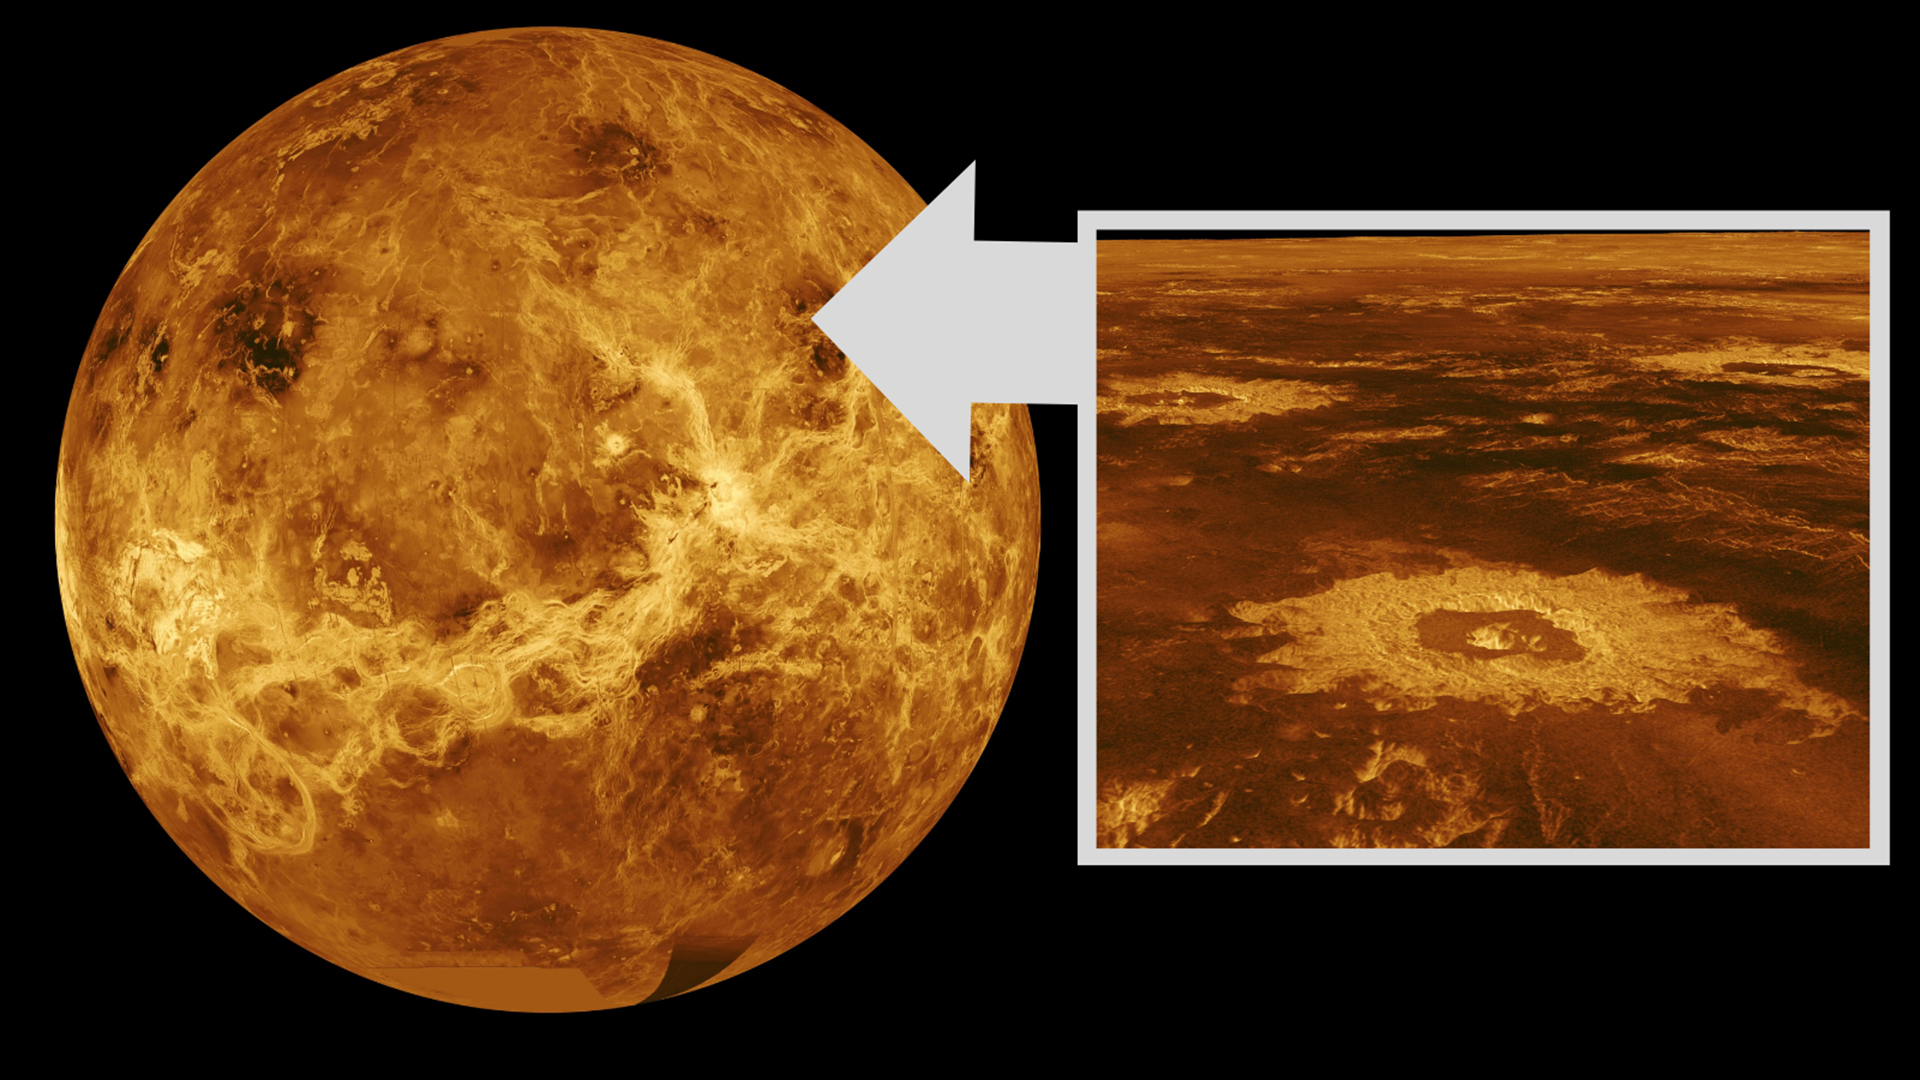 Ice can form short-lived clouds high above the hellish surface of Venus | Live Science